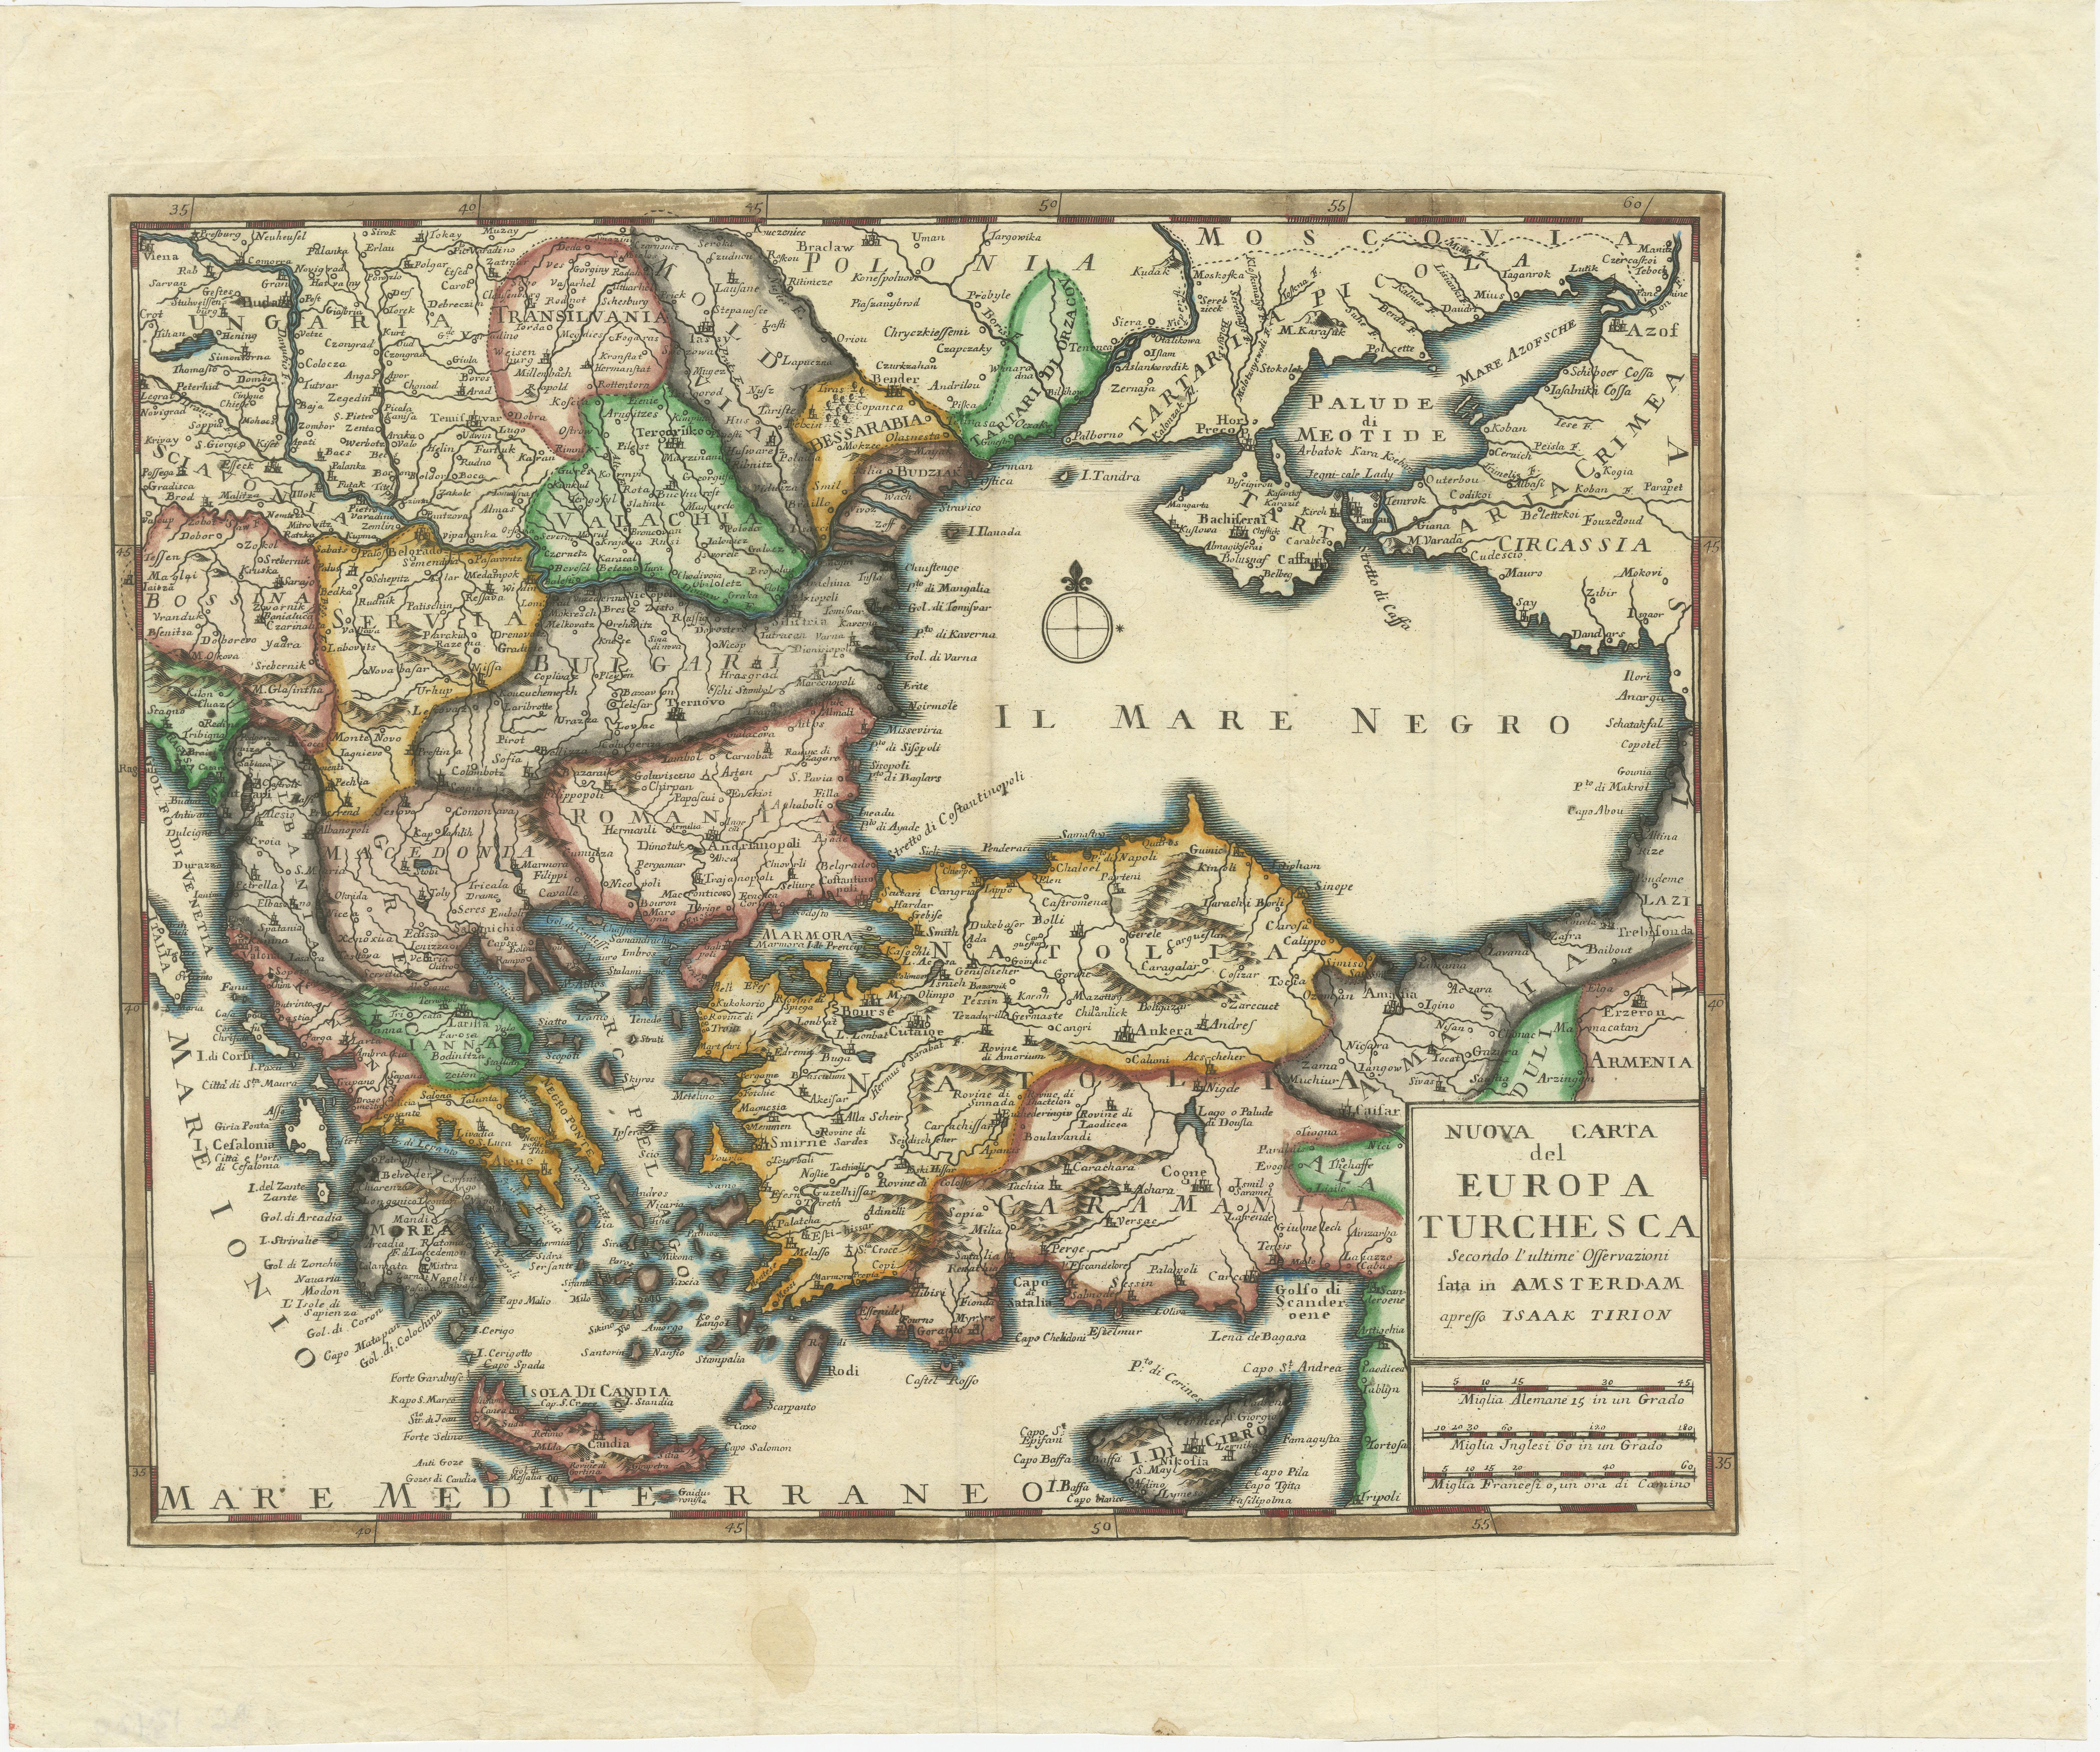 Antique map titled 'Nuova Carta del Europa Turchesca (..)'. This is an Italian version of Tirion's detailed map of the Black Sea, Balkans, and Asia Minor. It is embellished with a simple compass rose and provides a good view of the various political